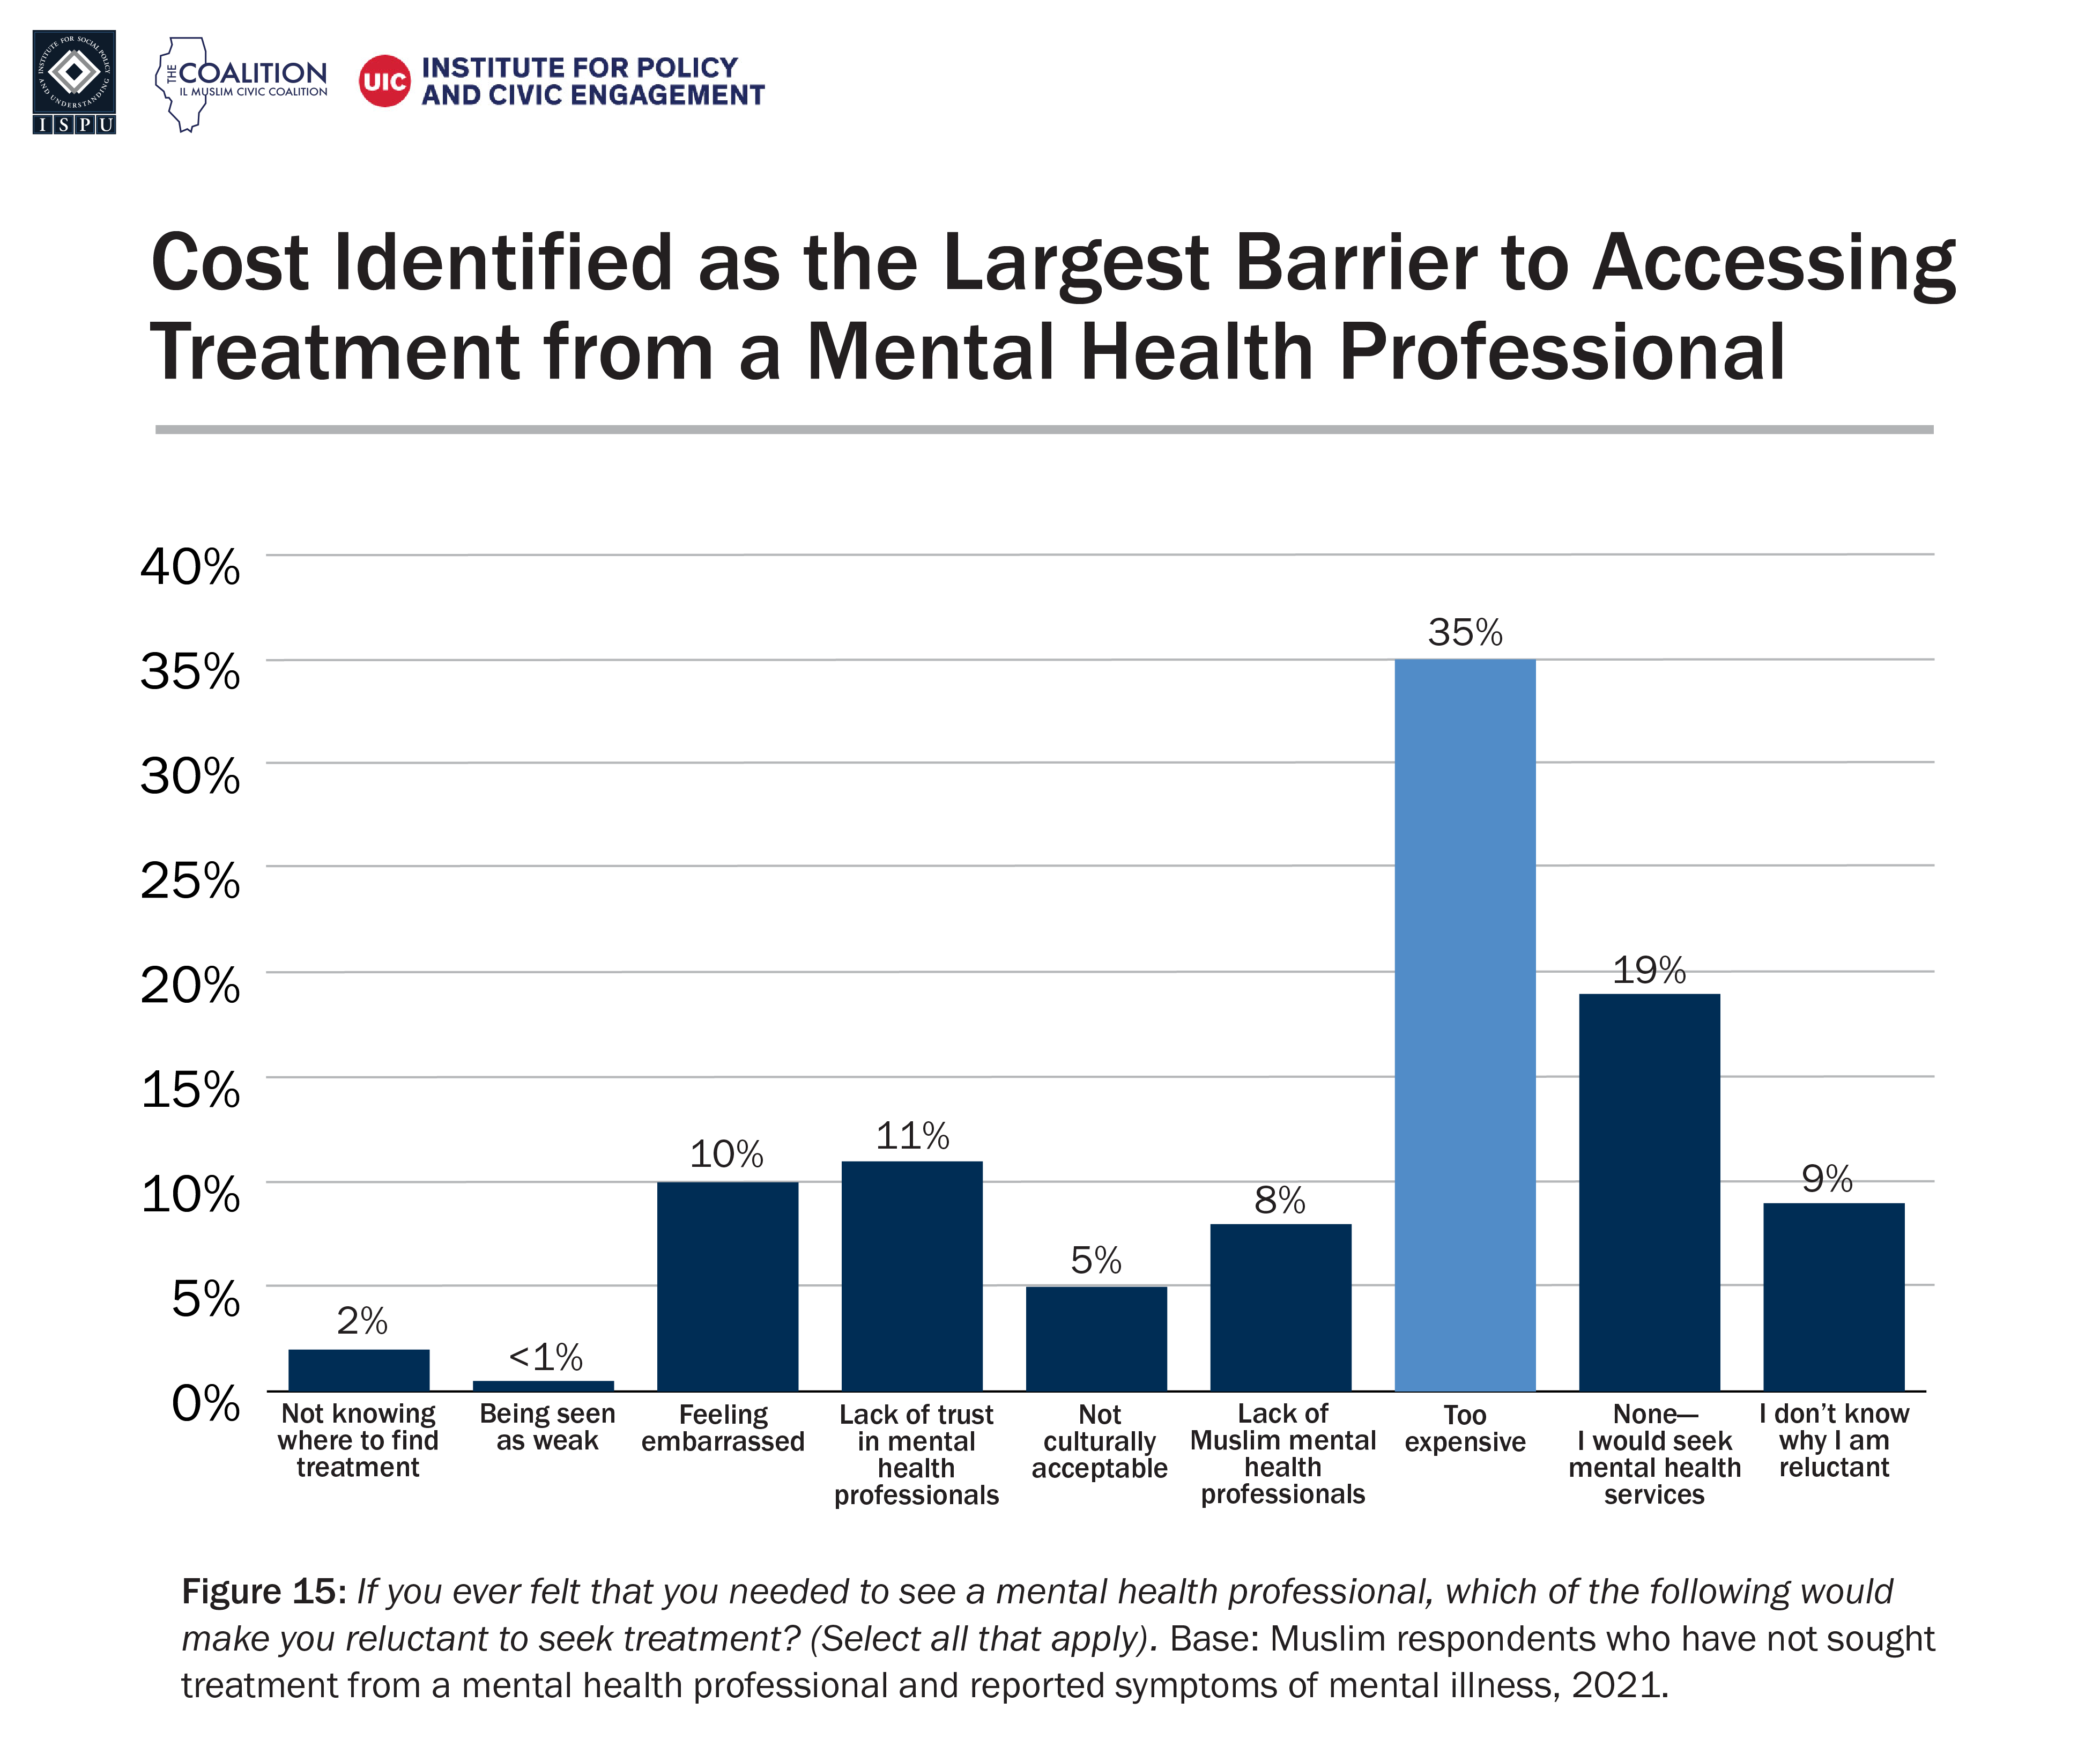 A bar graph that shows the barriers to accessing mental health treatment reported by Illinois Muslim respondents who have not sought treatment from a mental health profession and reported symptoms of mental illness